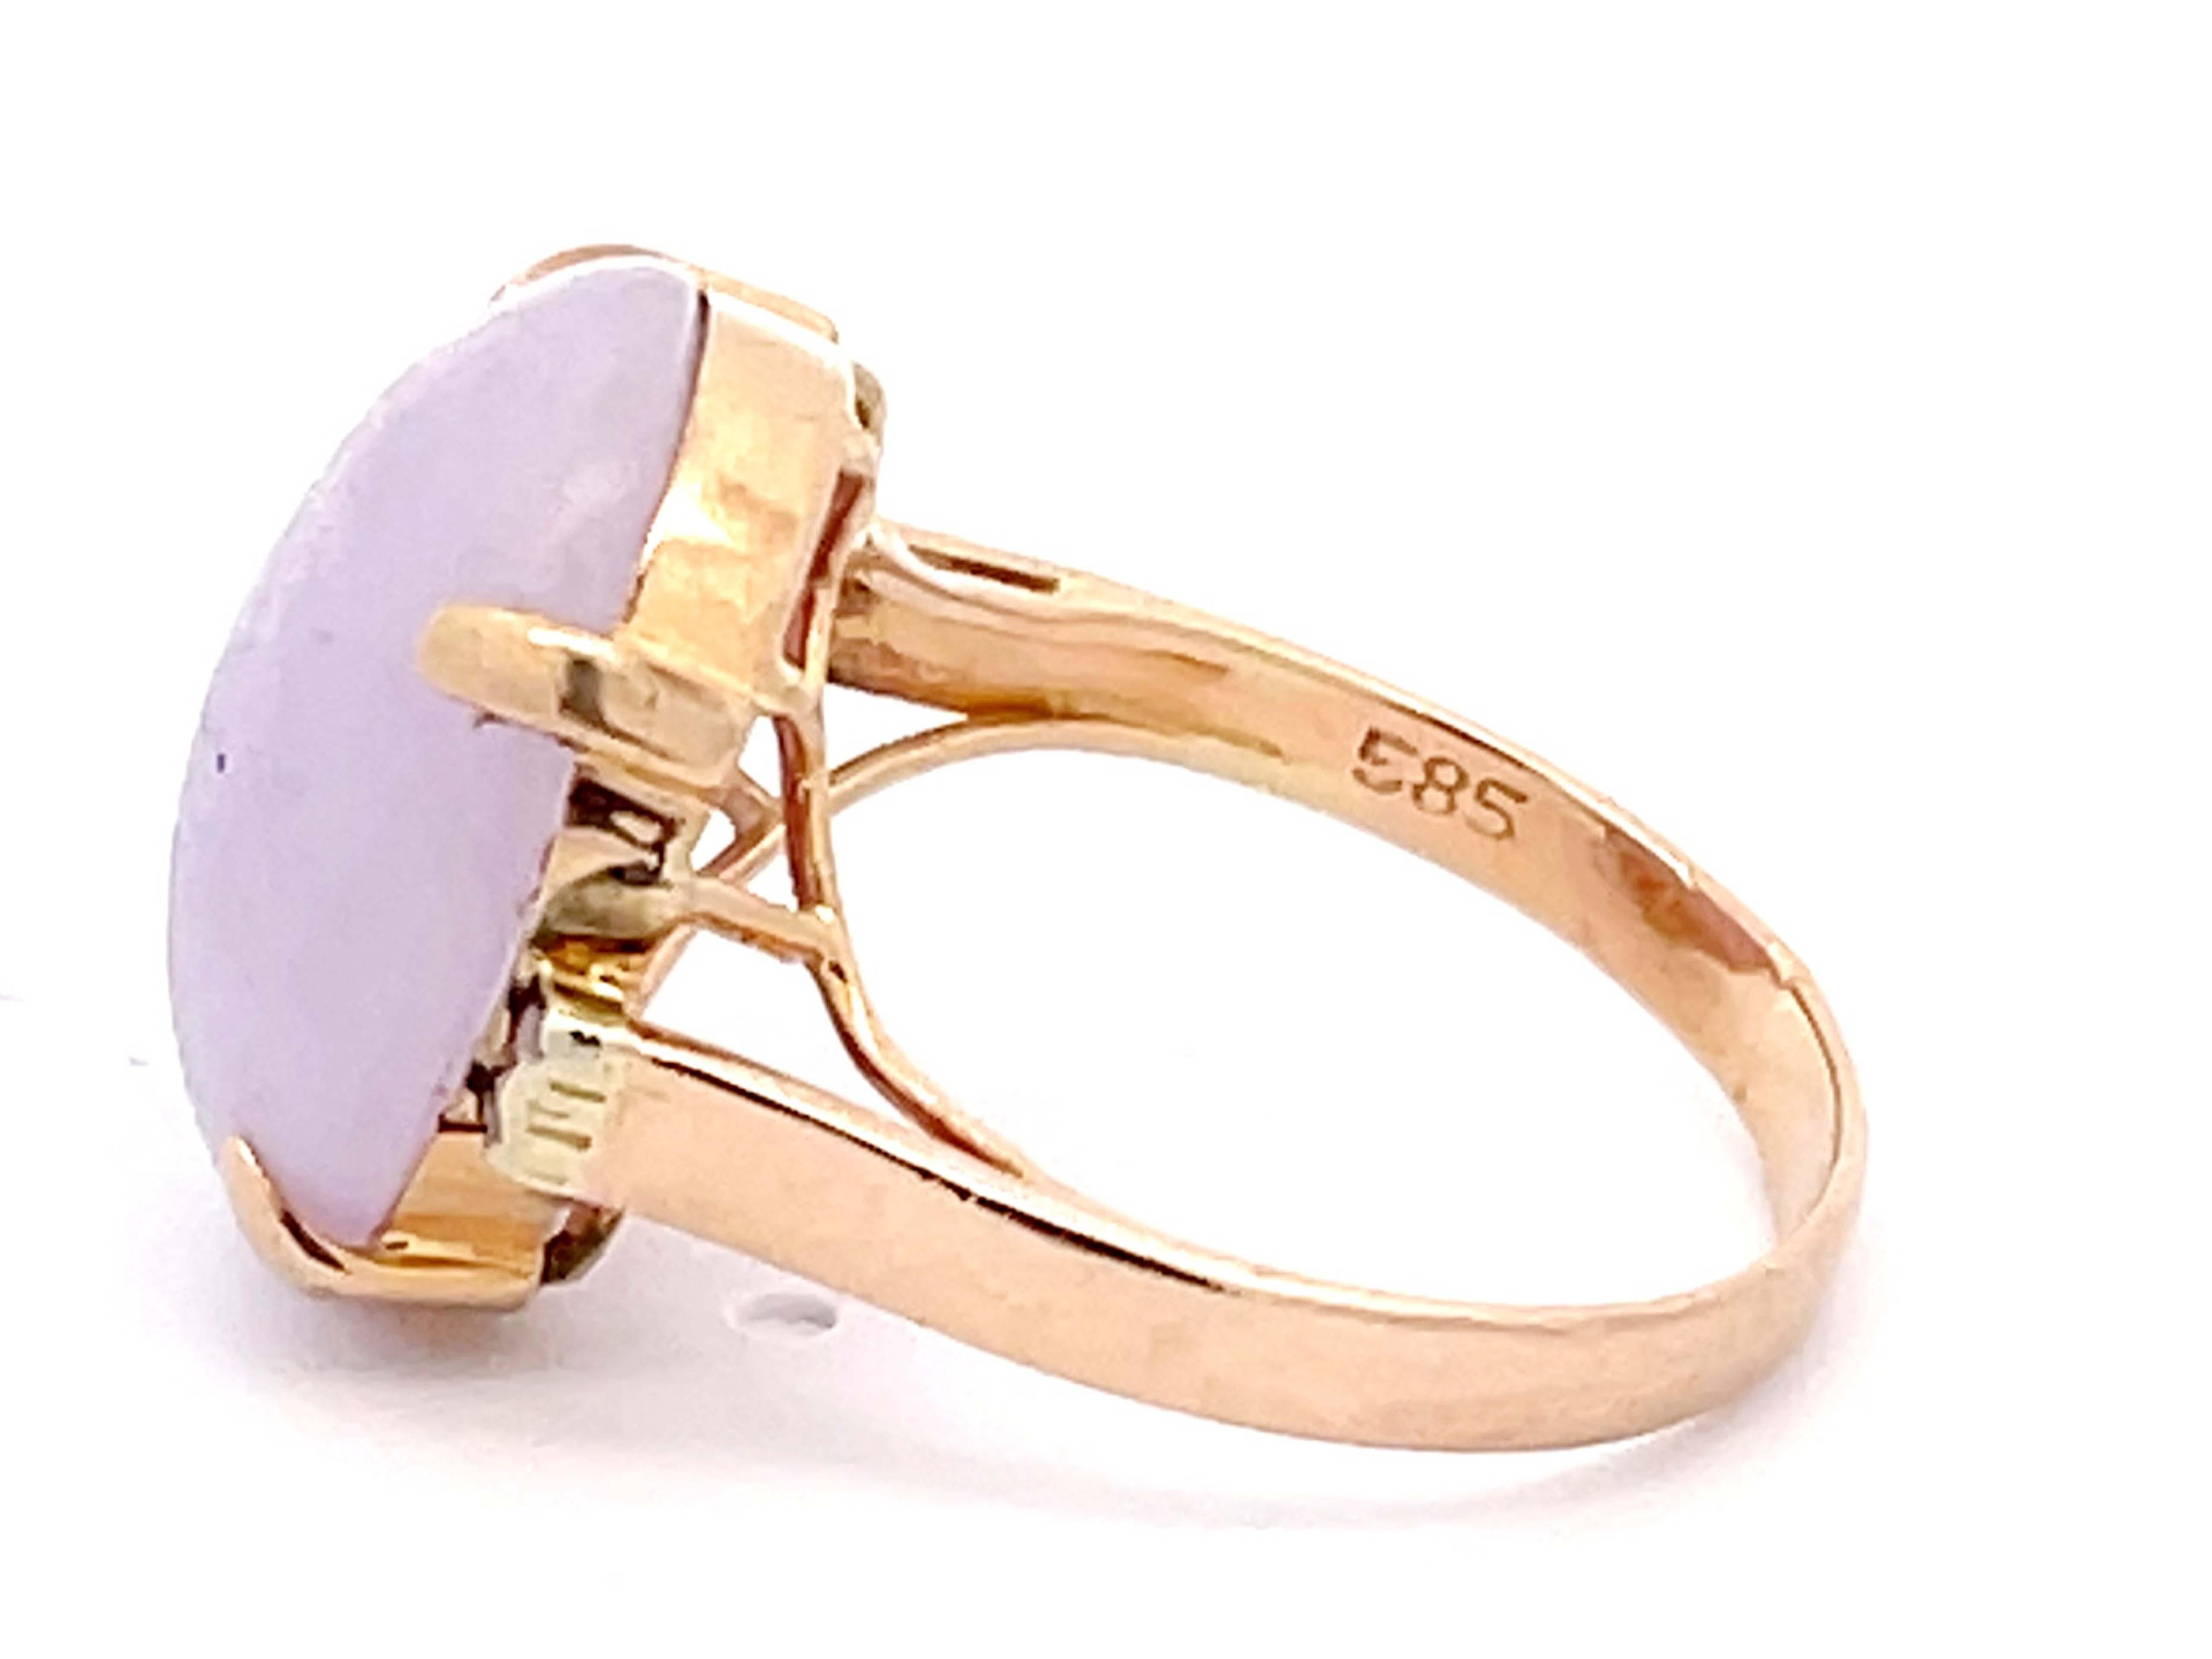 Lavender Oval Jade Cabochon Ring in 14k Yellow Gold In Excellent Condition For Sale In Honolulu, HI